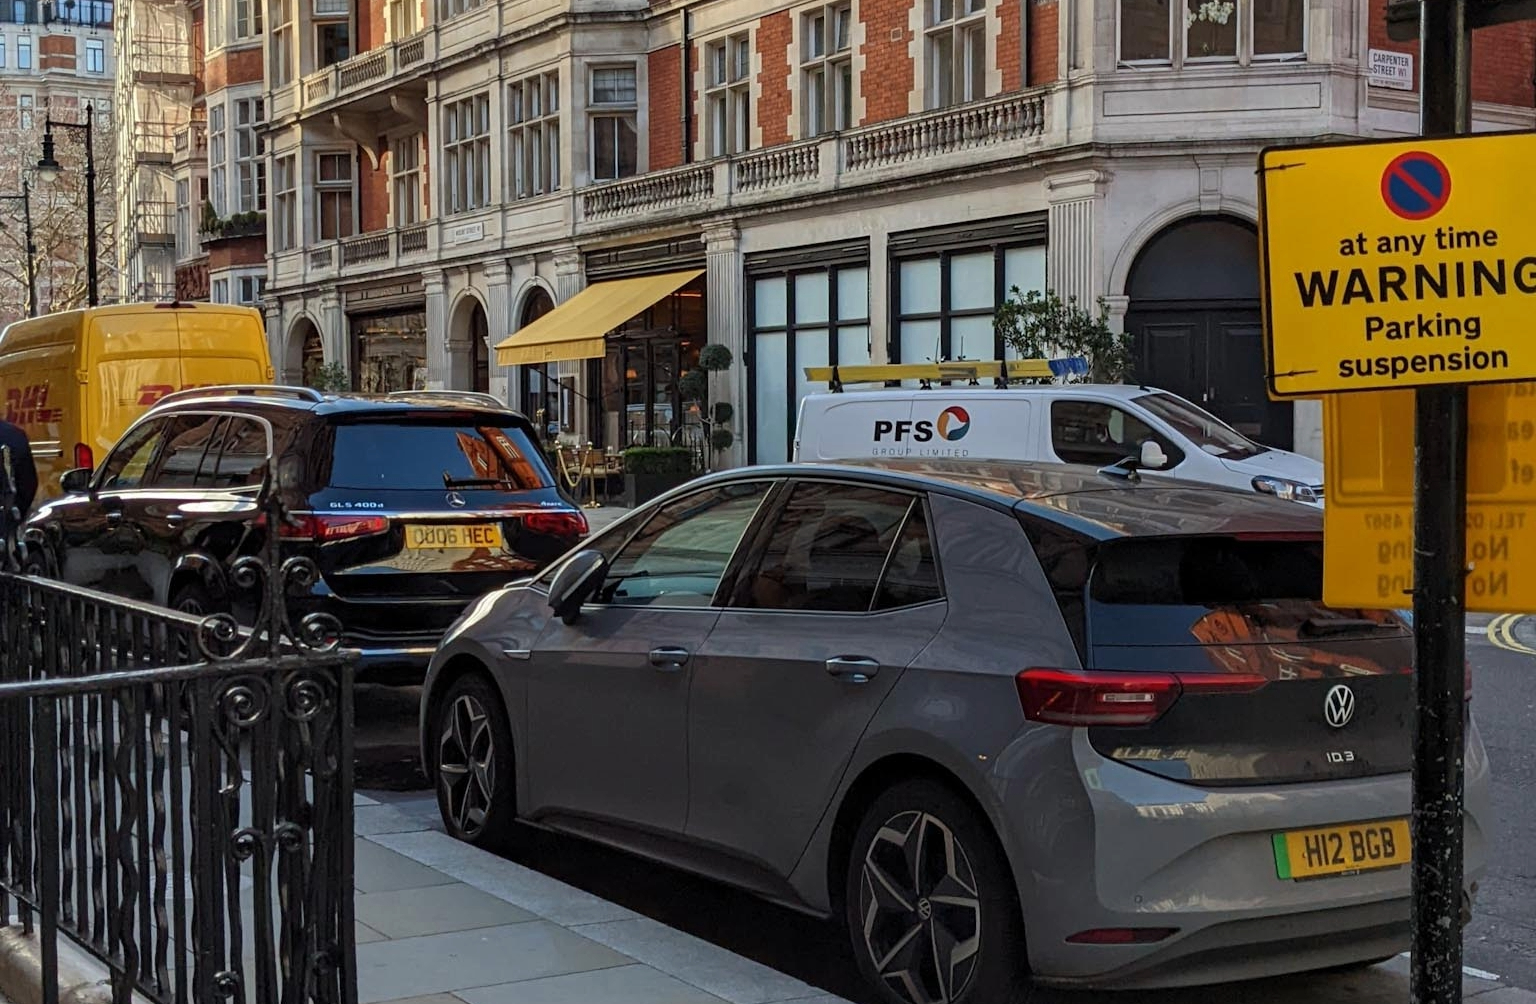 How to get a temporary parking permit in London